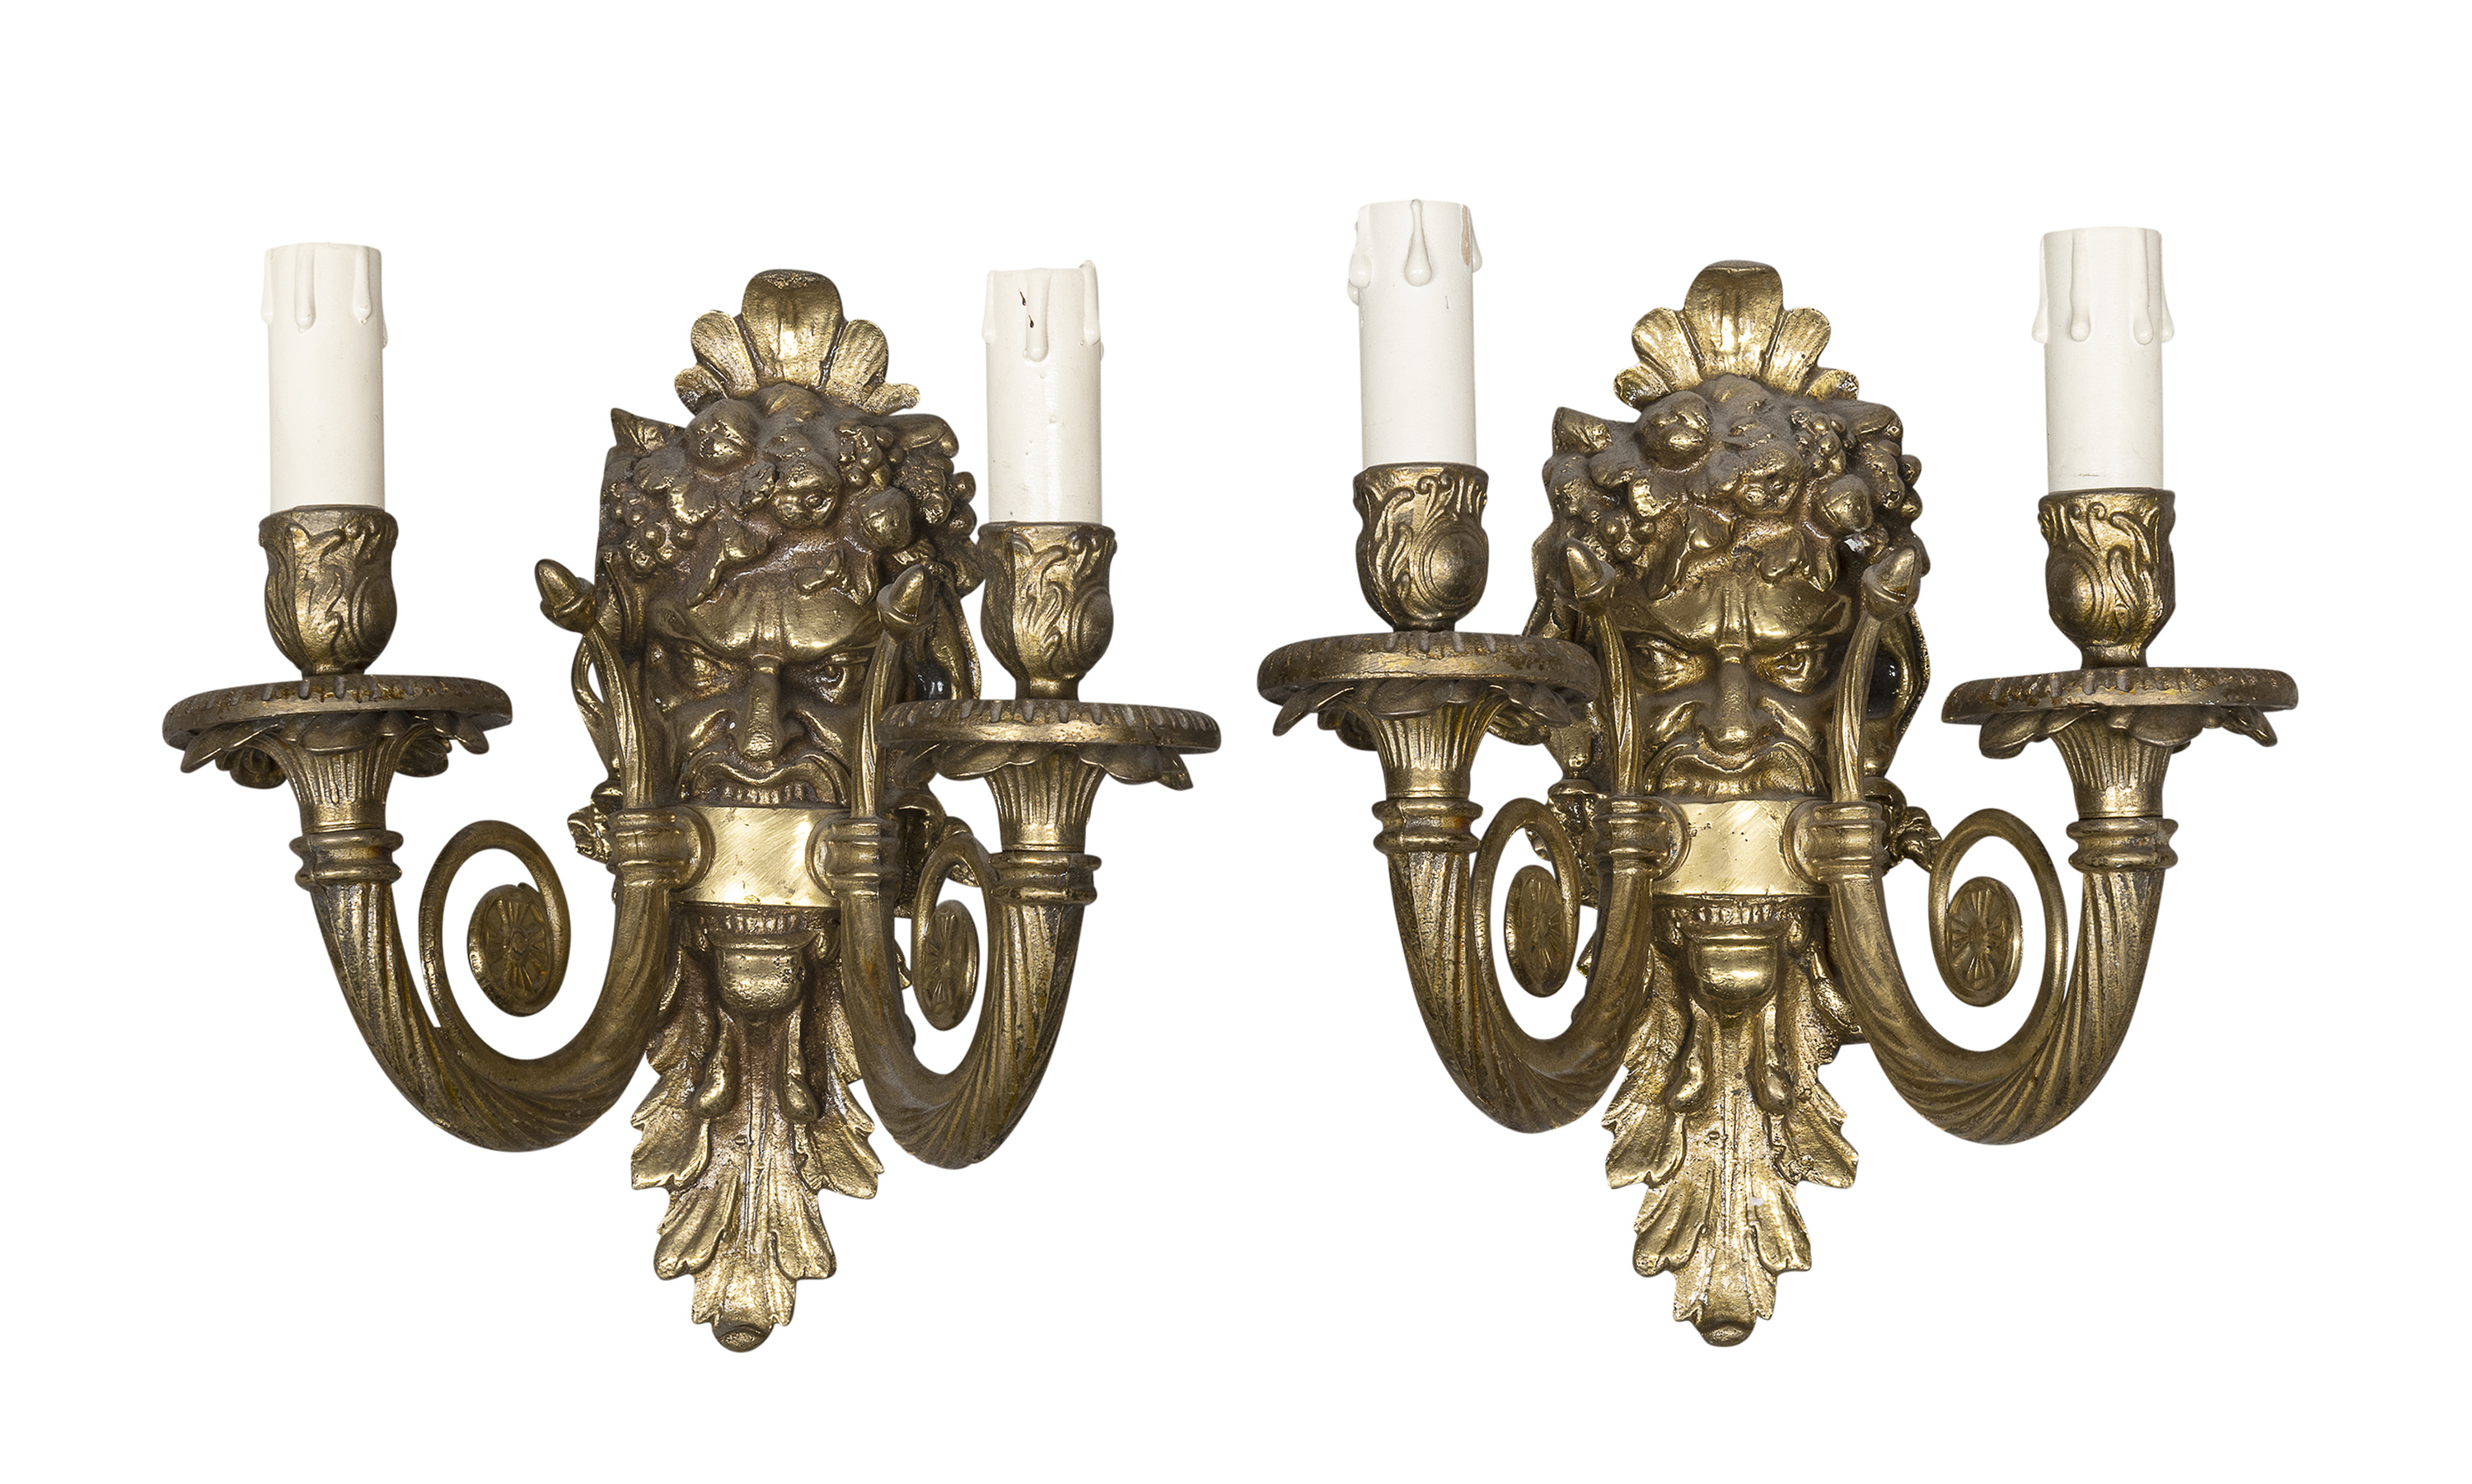 PAIR OF BRONZE WALL LAMPS LATE 19th CENTURY